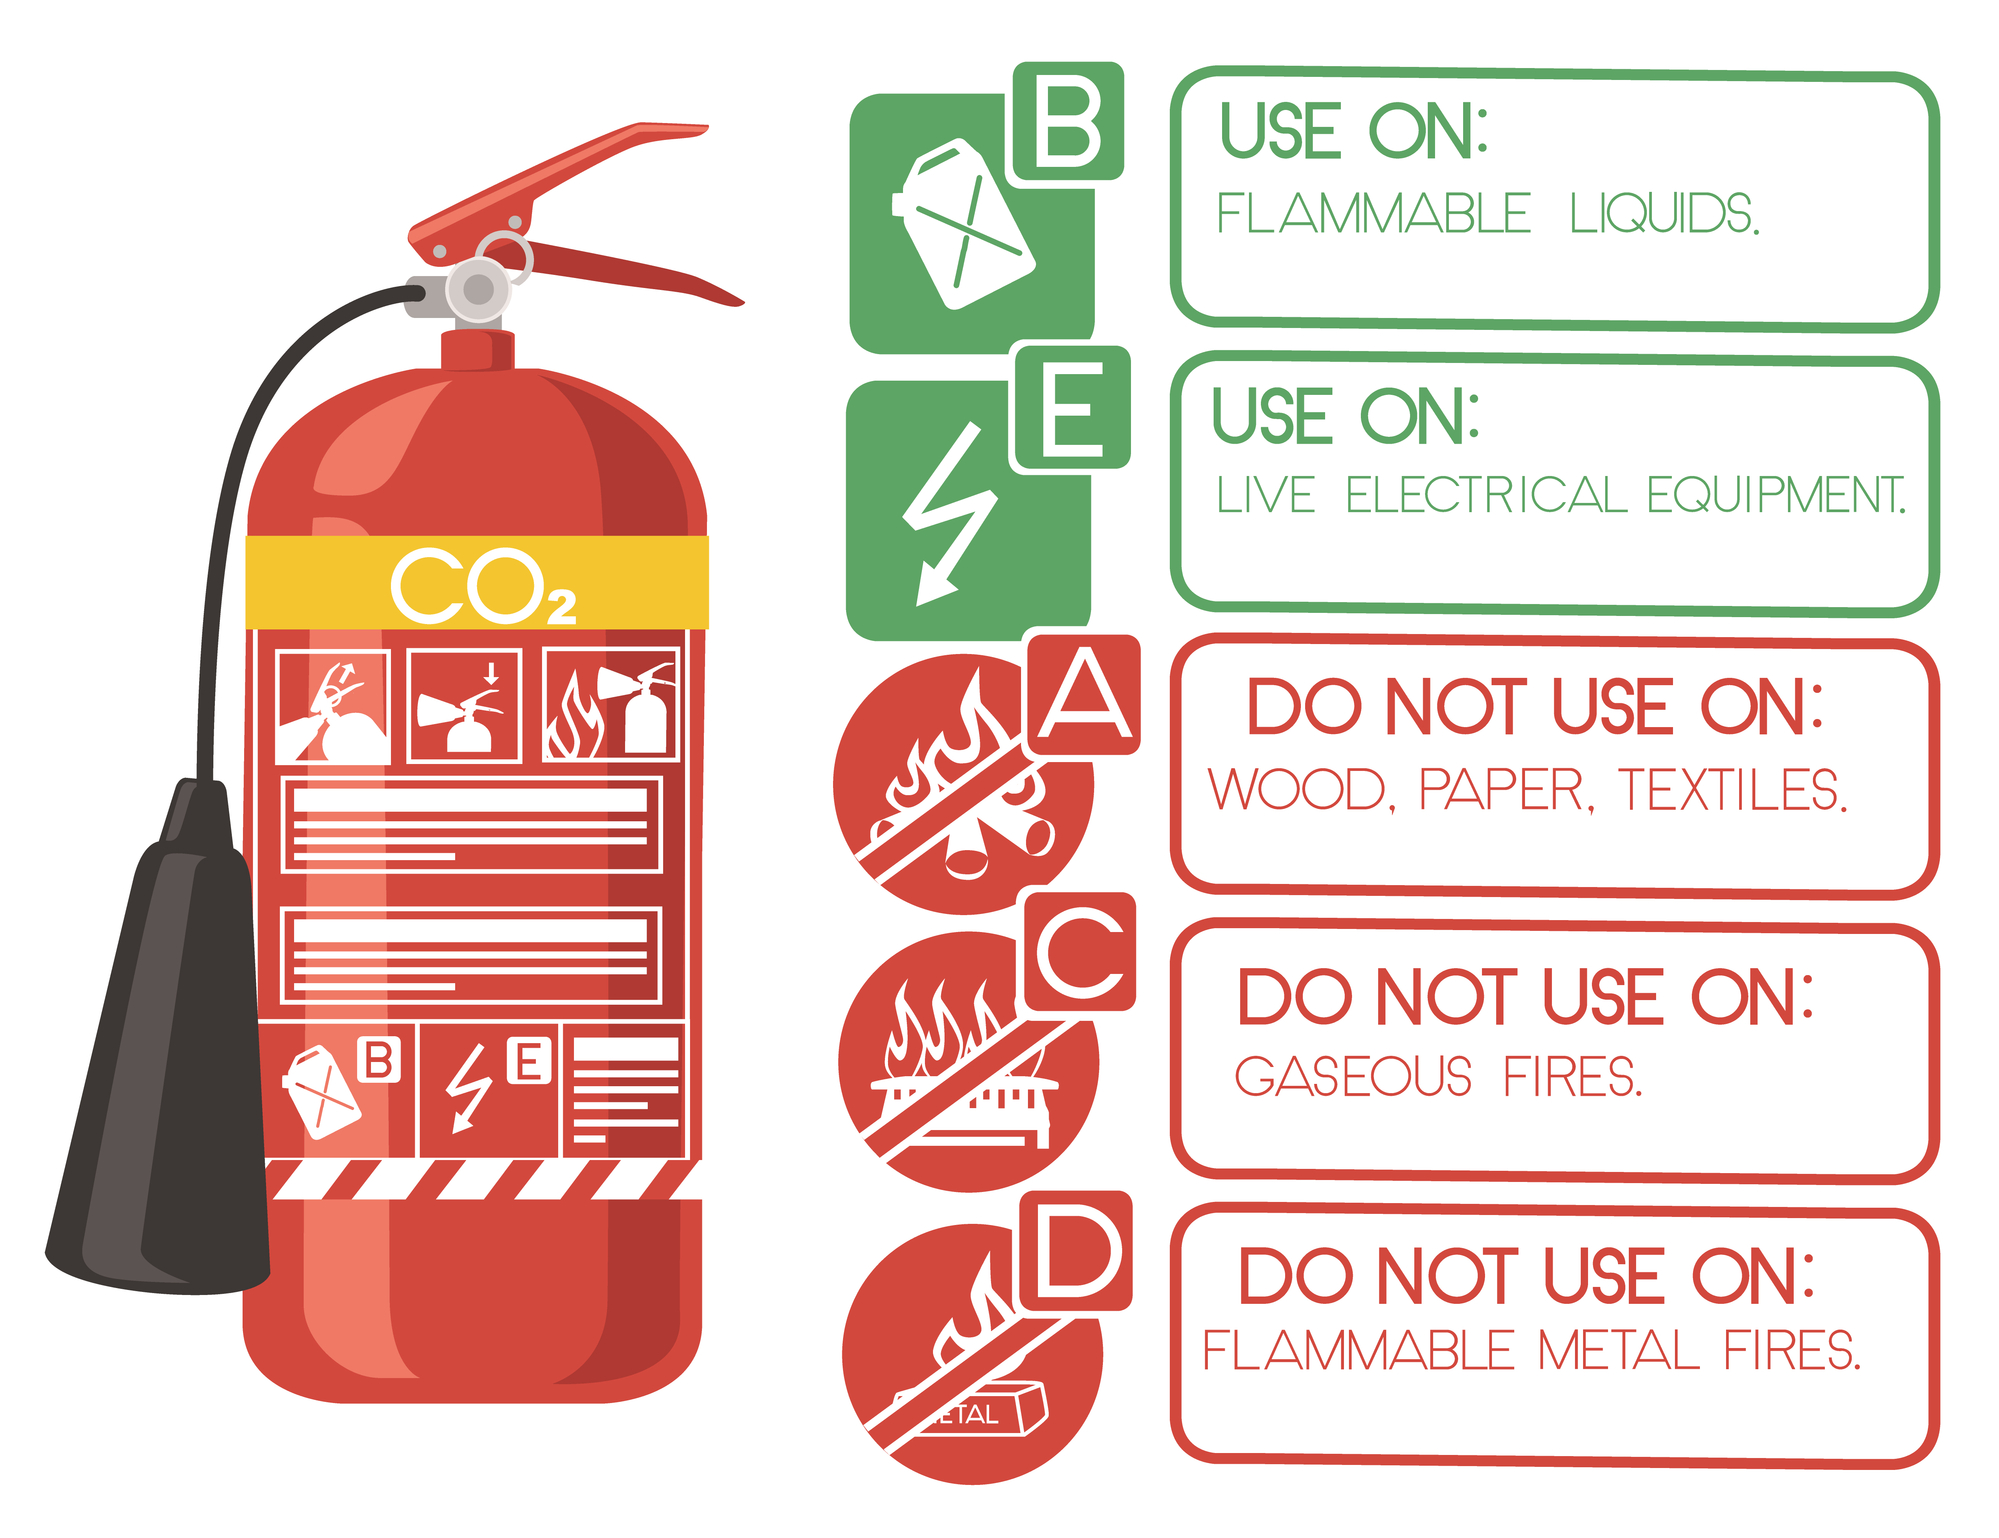 What You Should Know About Creating Warning and Safety Labels